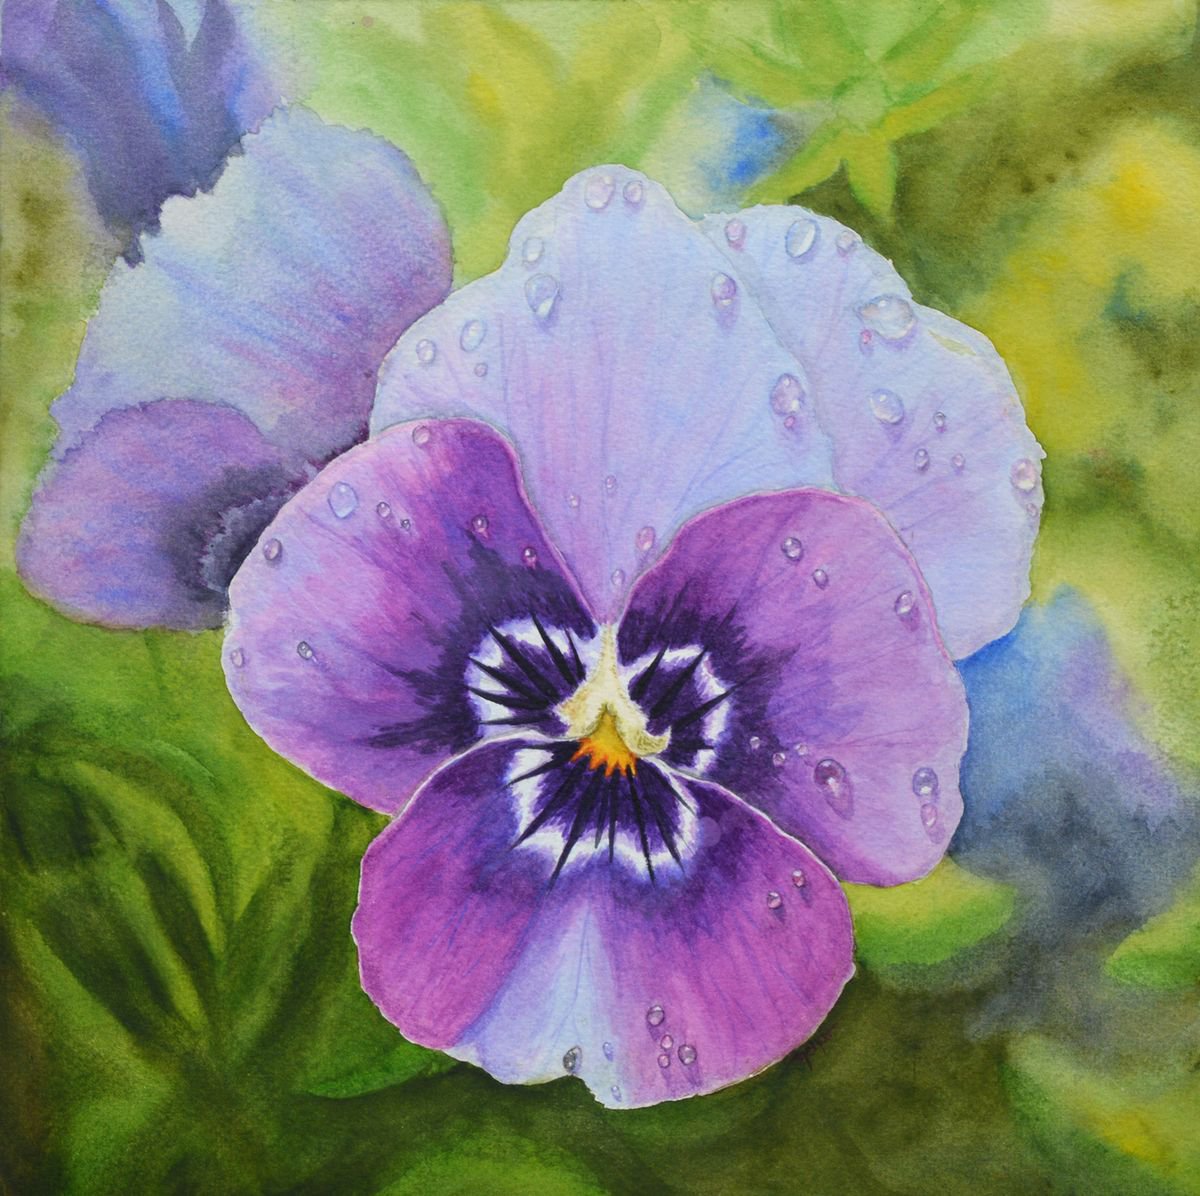 Pansy with dewdrops by Neha Soni